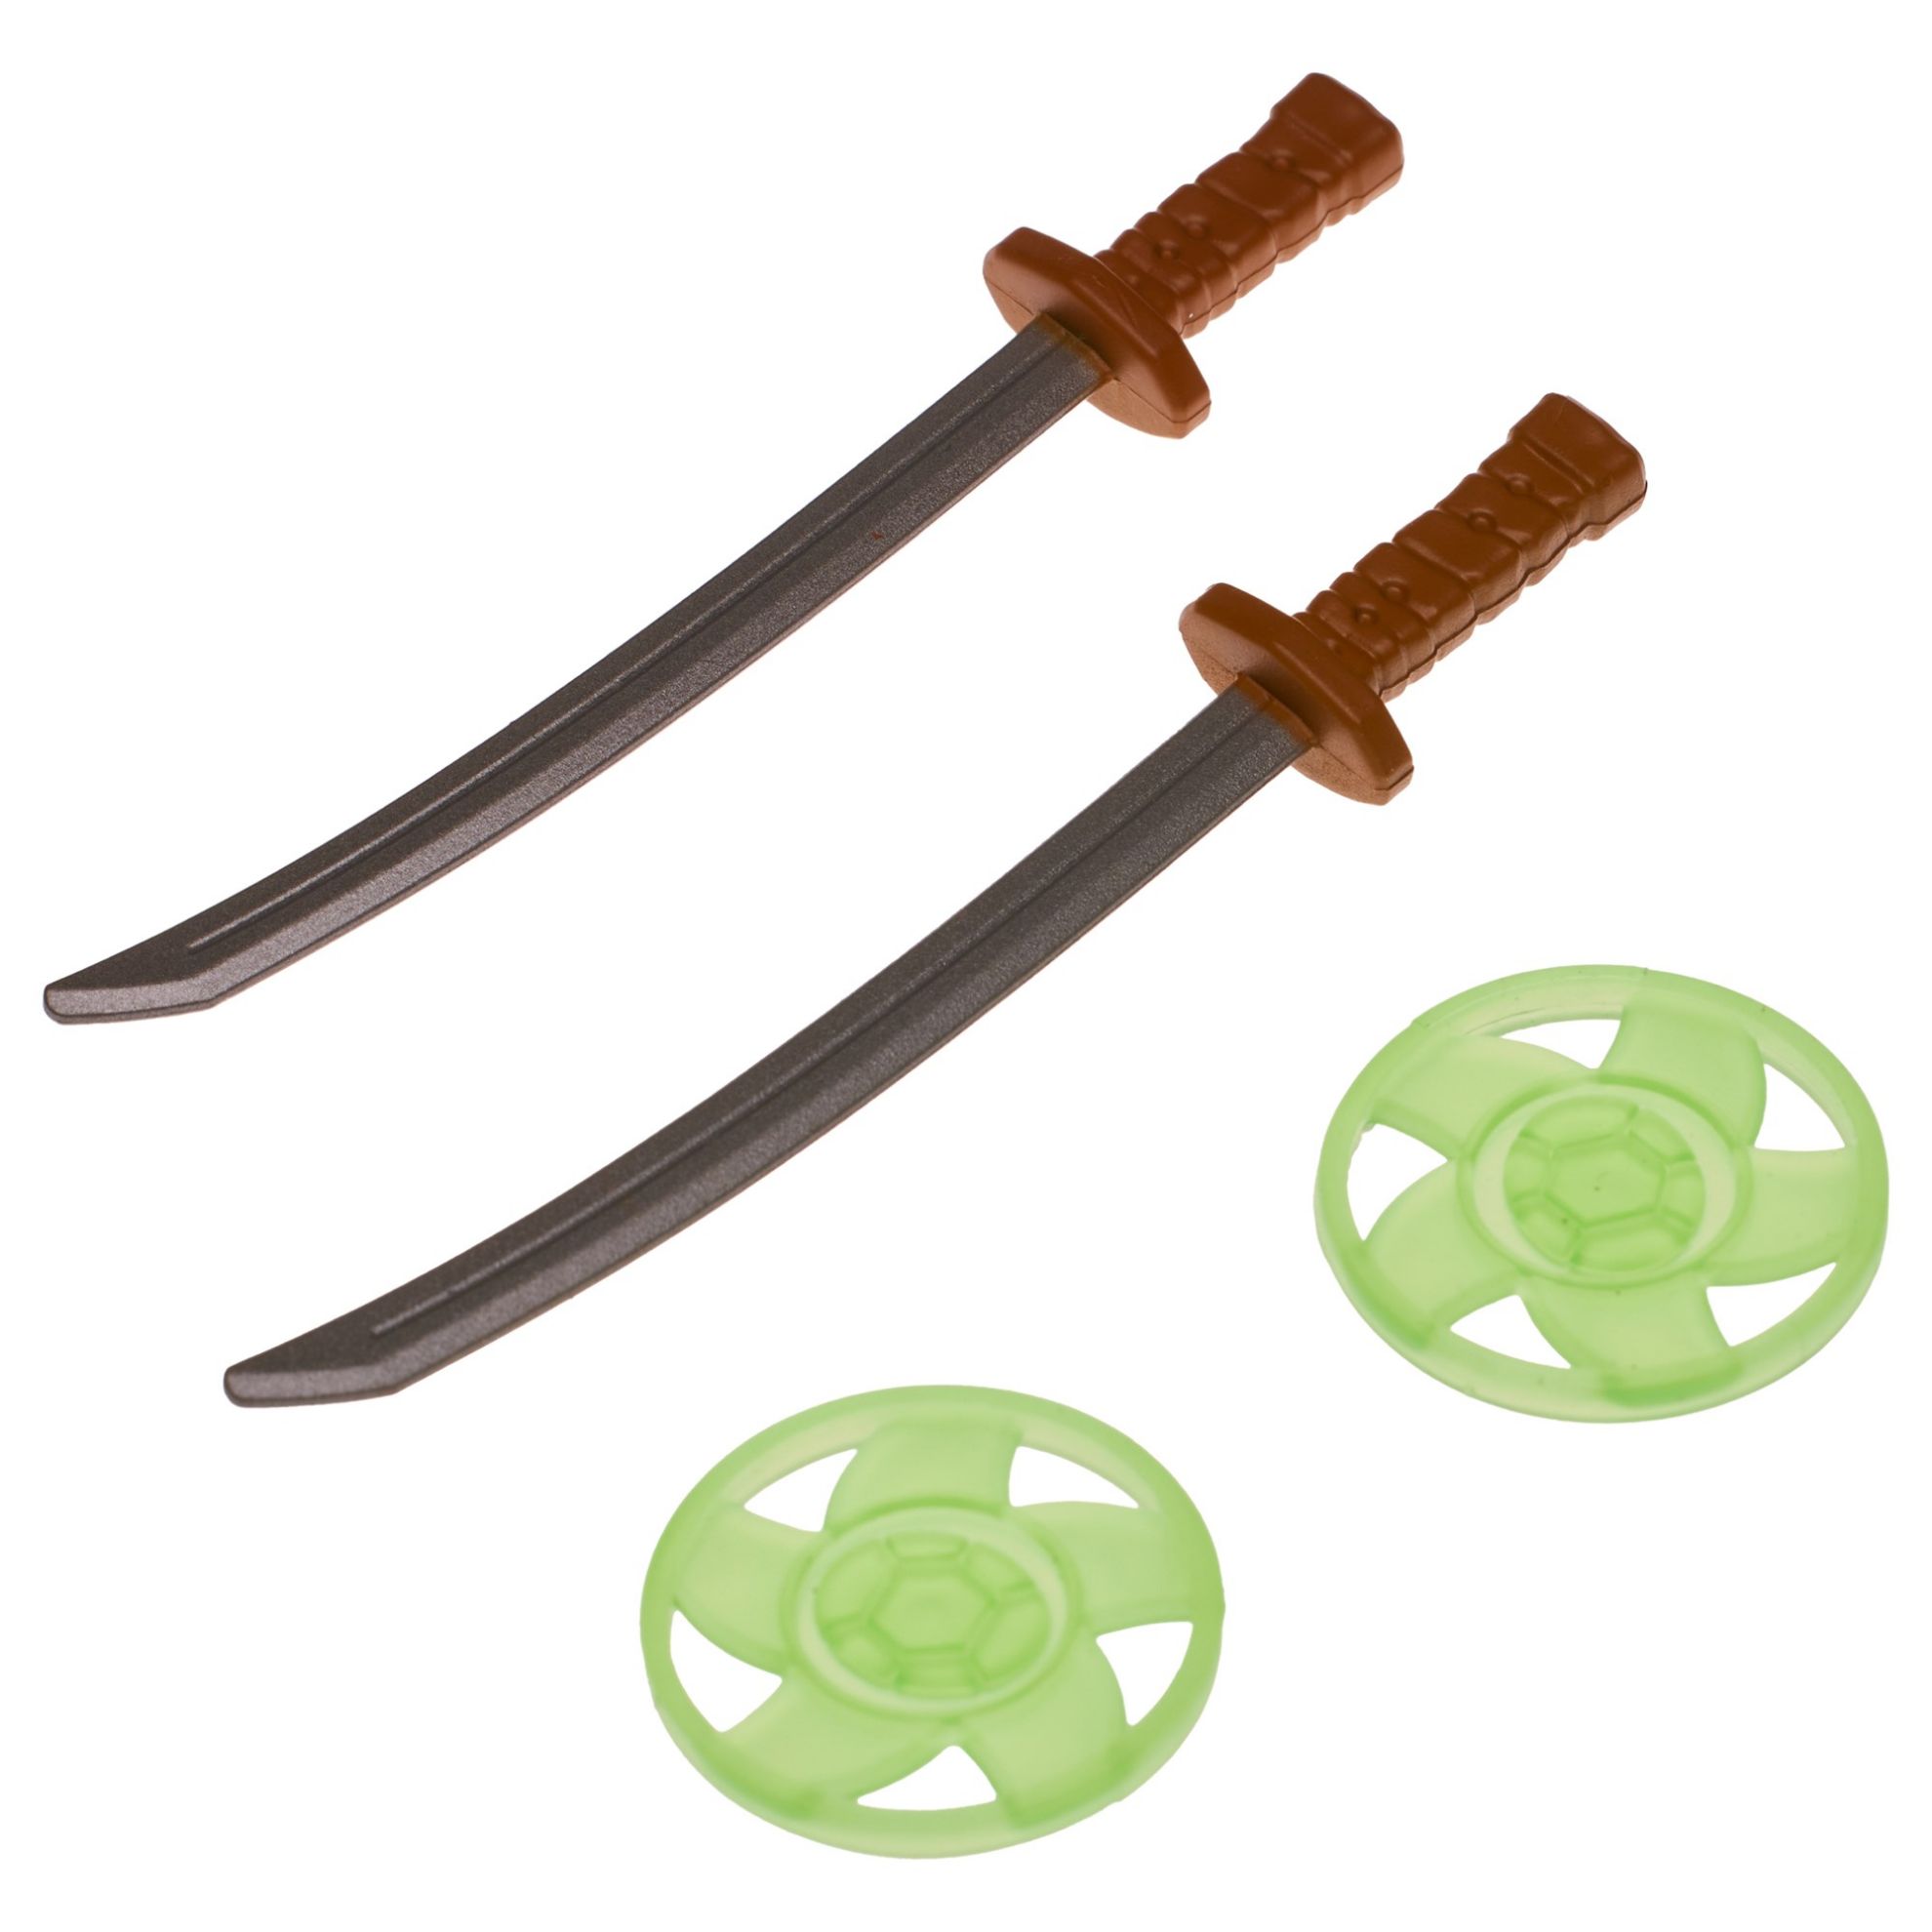 Spare Parts - TMNT Movie Kick Cycle Weapons & Disk